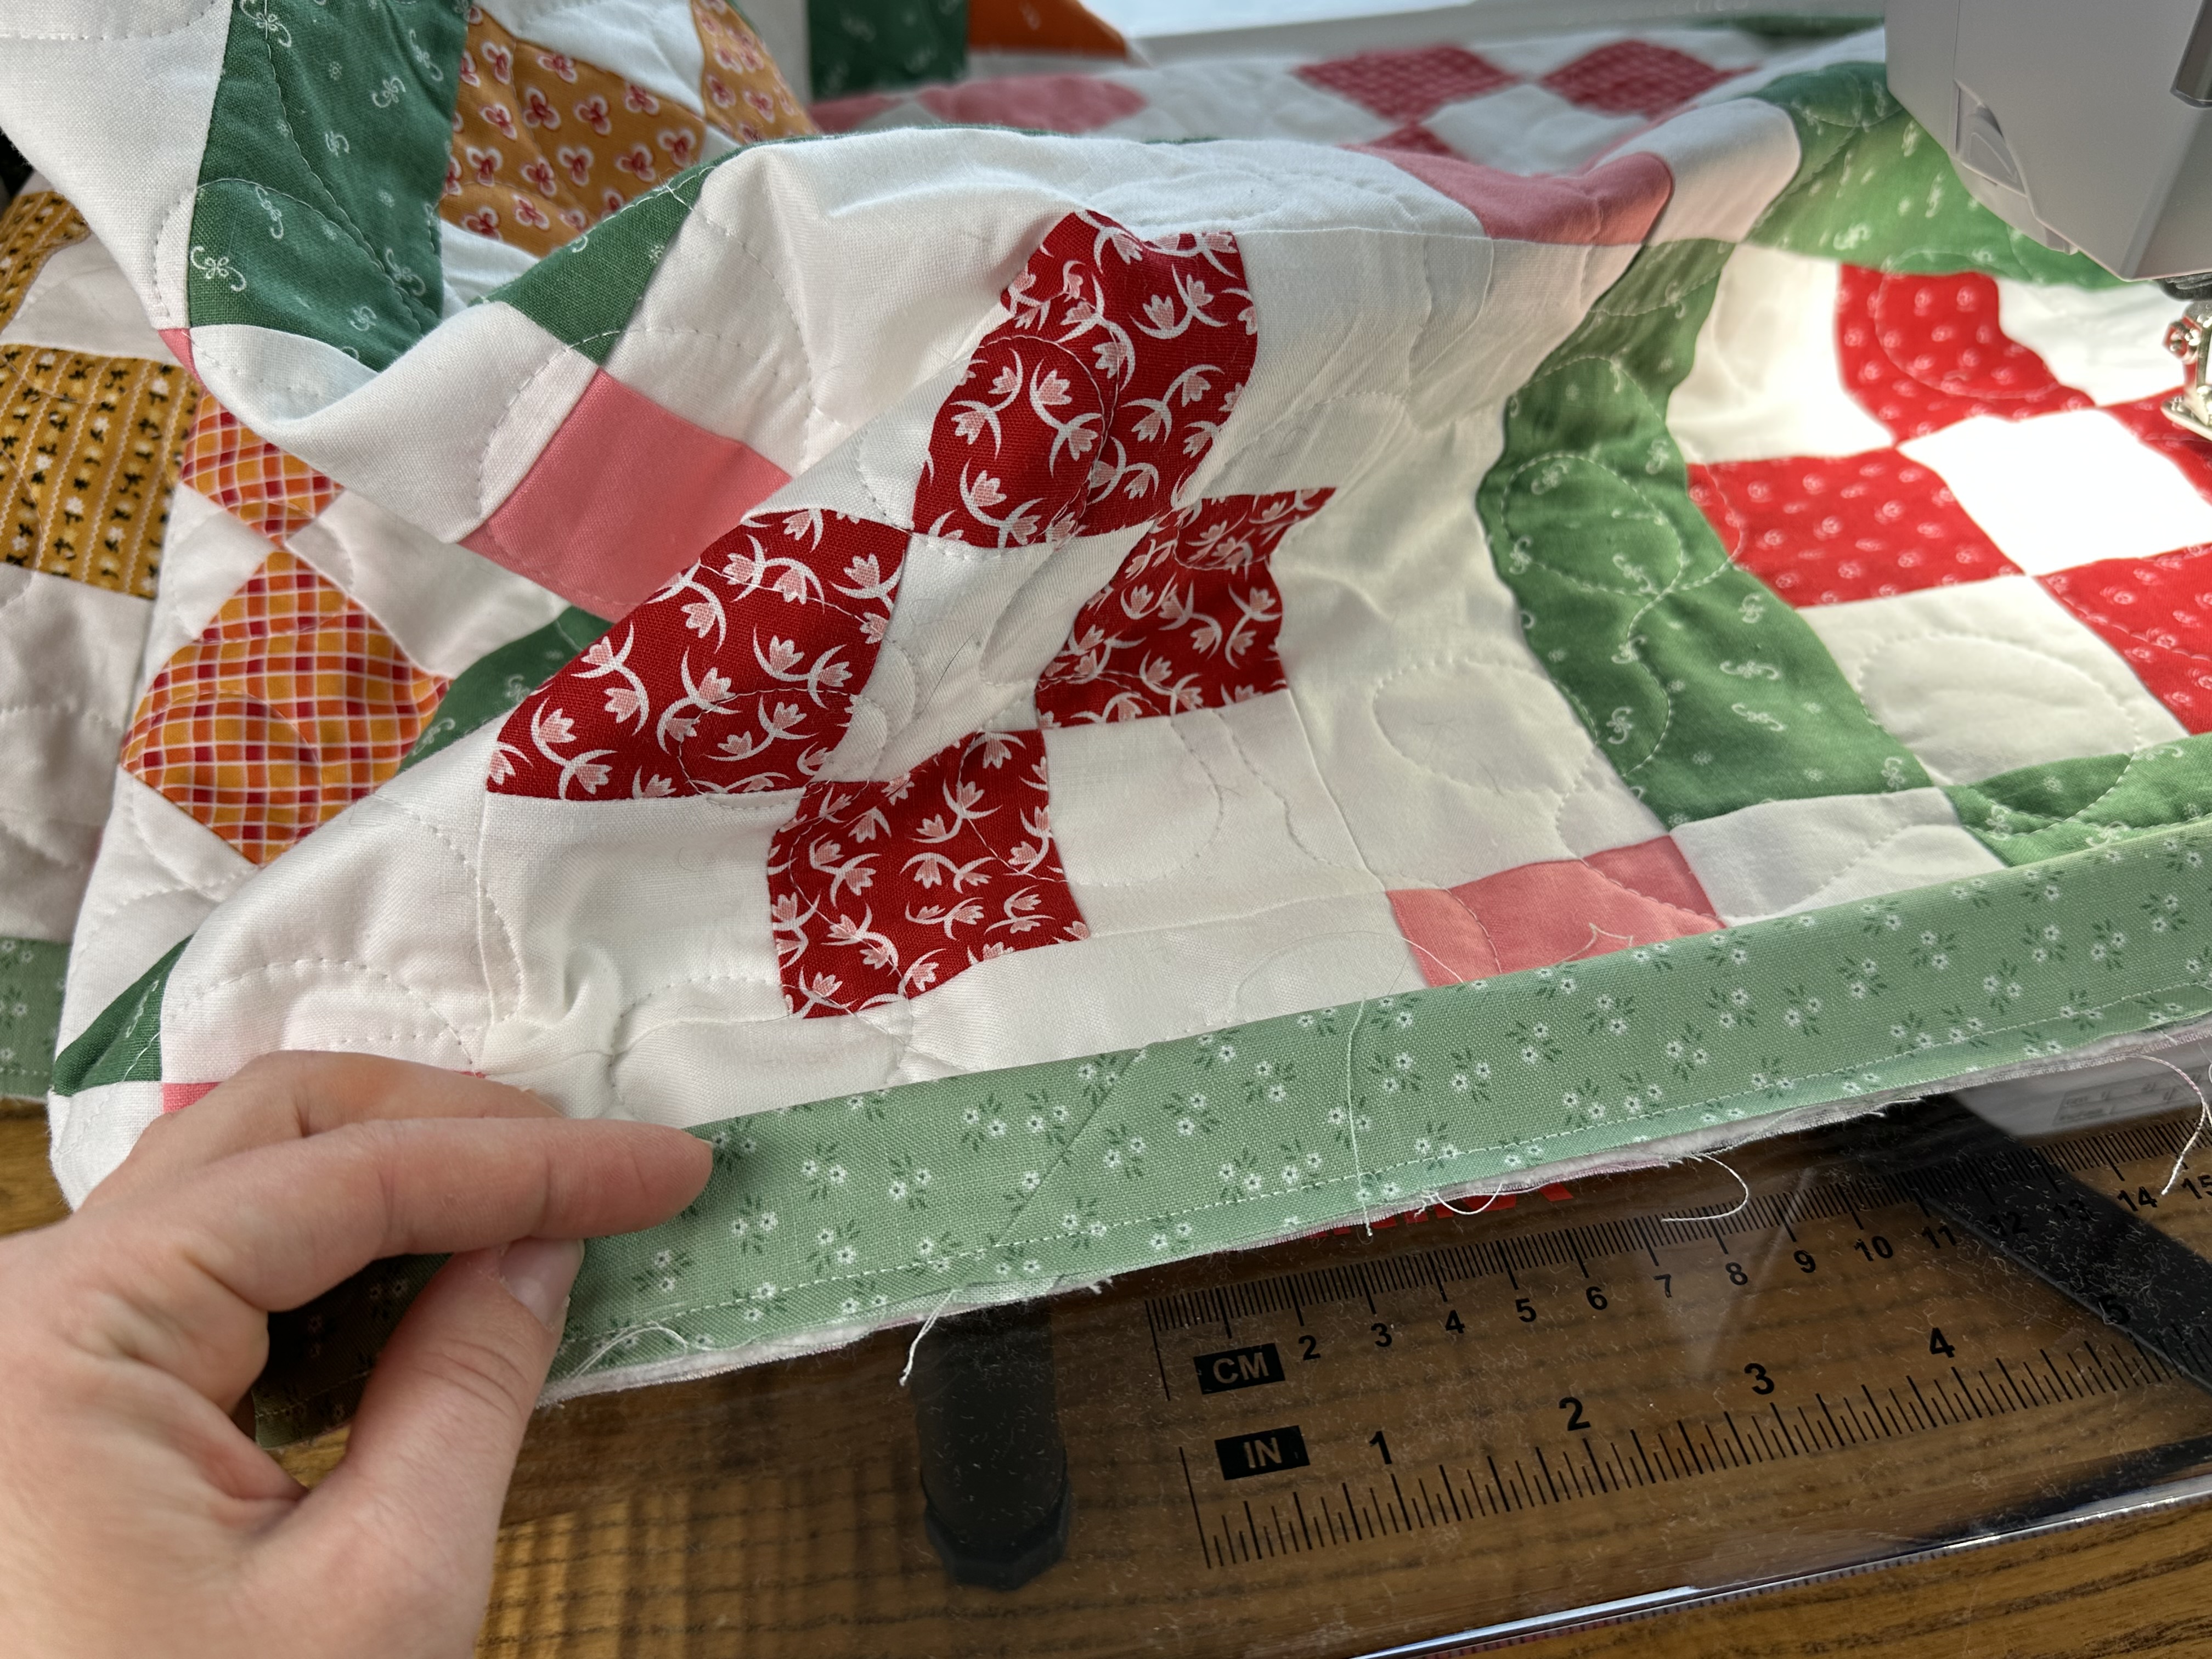 Joining the end of the binding for the Nona Quilt Along BERNINA WeAll Sew blog